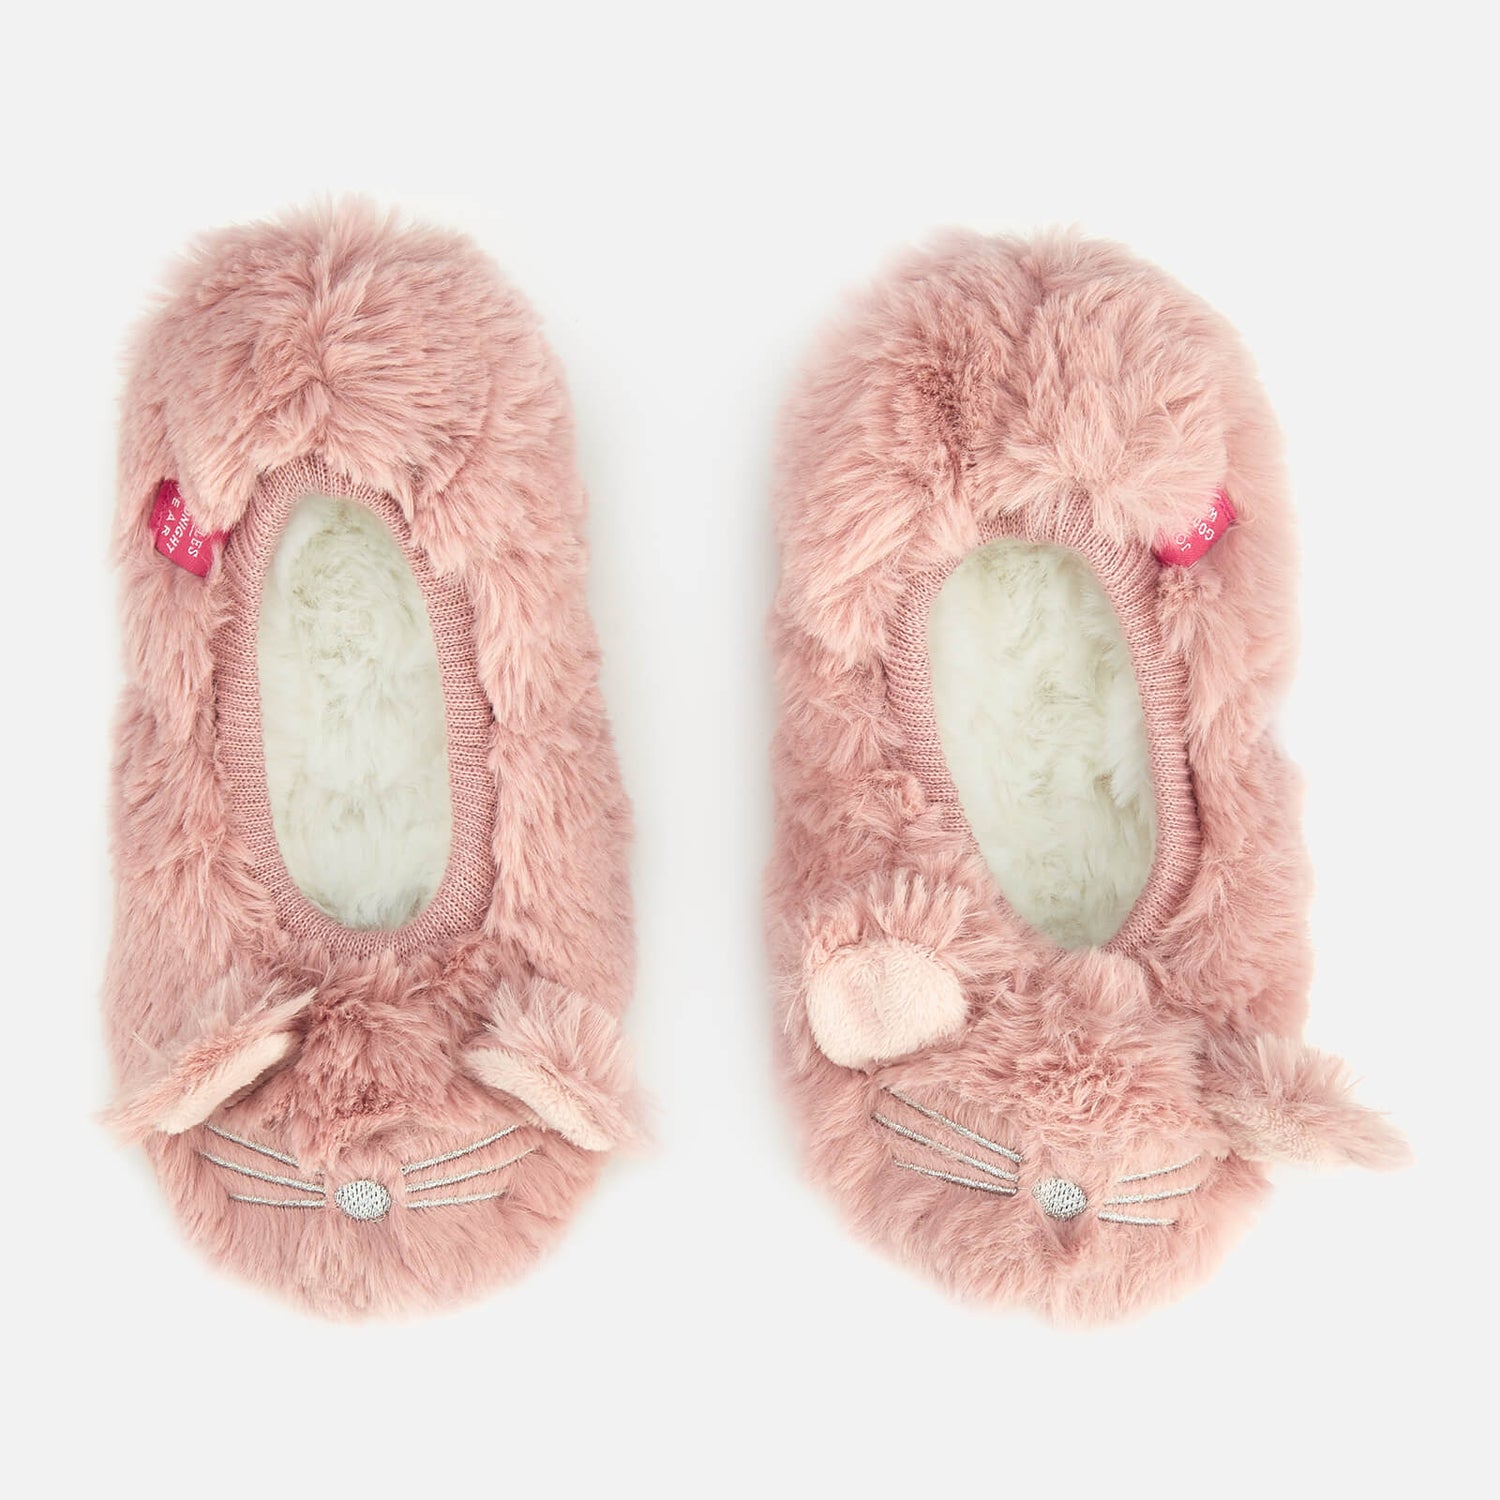 Joules PIPPIE Girls Character Ballet Slippers Soft Pink